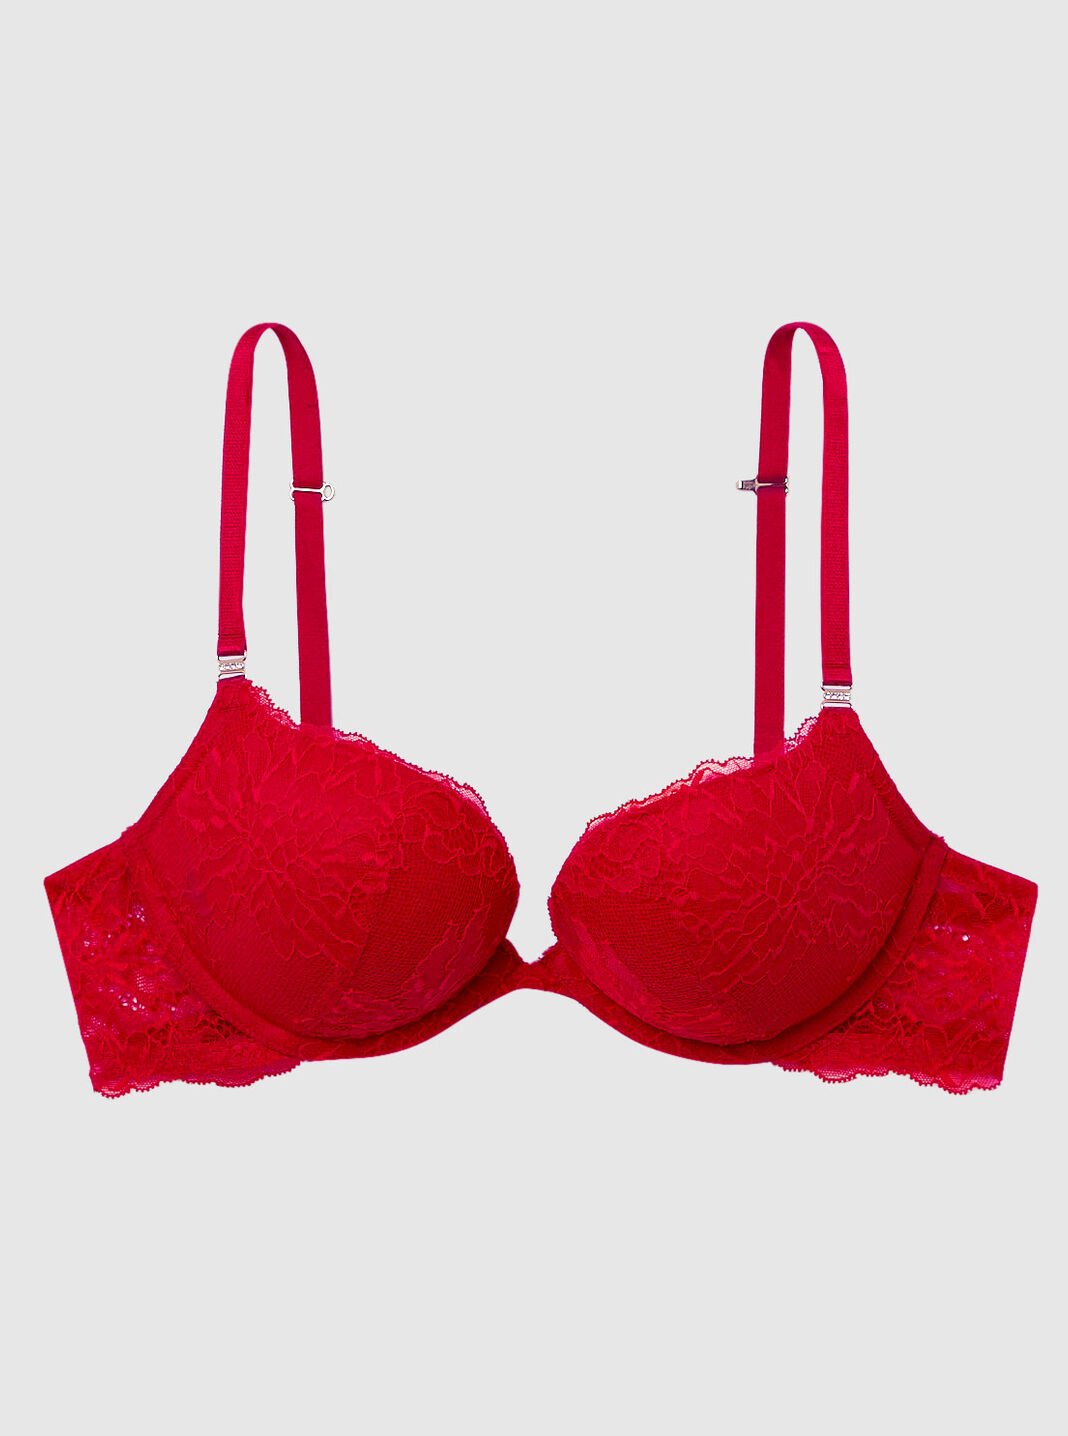 Victoria's Secret Very Sexy Push Up Bra Red Lace with Bow 32A 